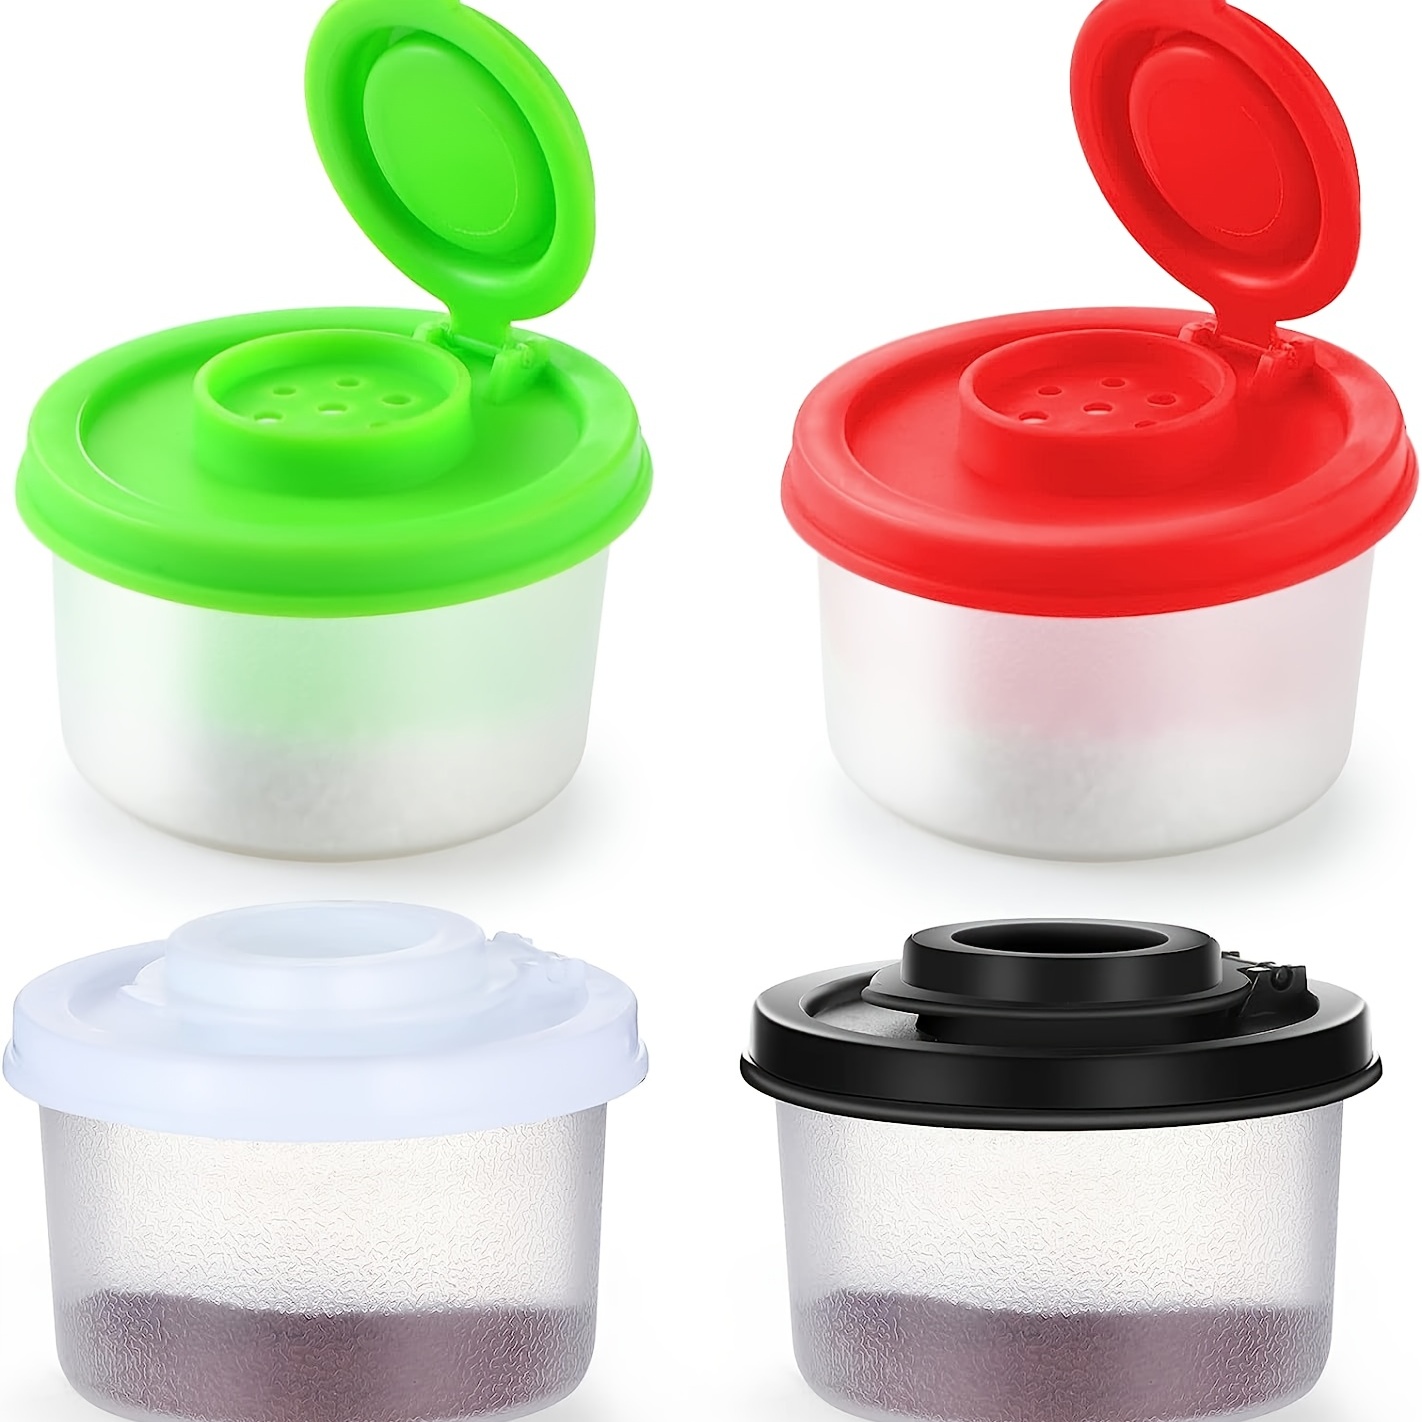 Pengpengfang 2 Pcs Spice Jar with Lid Clear Detachable Reusable Refillable  Multi-functional 4 Colors Small Pour Holes Seasoning Container Kitchen  Accessories 